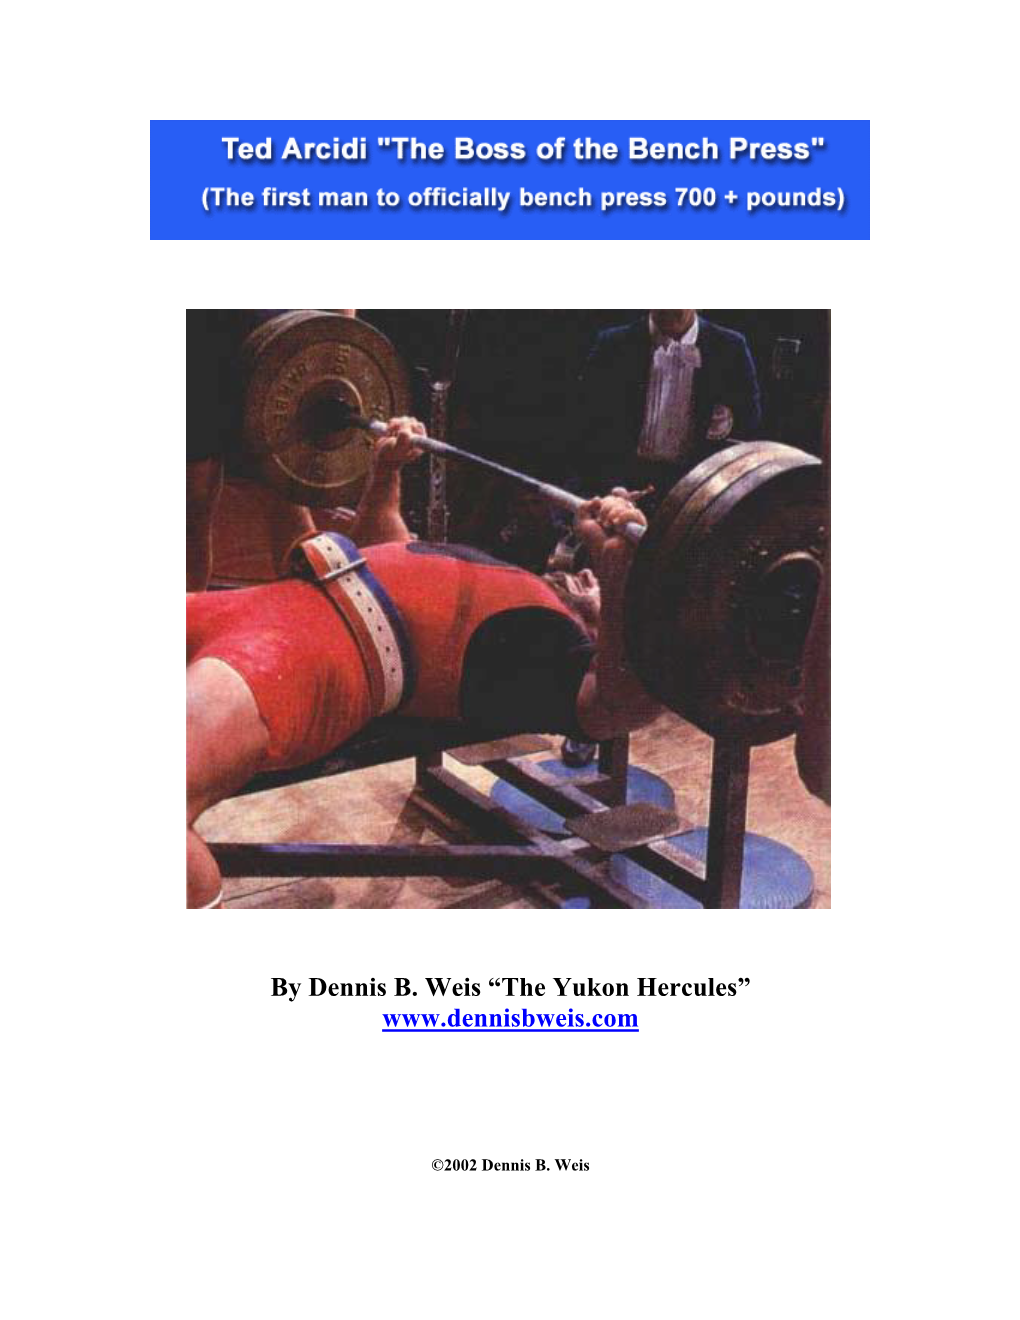 Ted Arcidi: “The Boss of the Bench Press” (The First Man to Officially Bench Press 700+ Pounds) by Dennis B